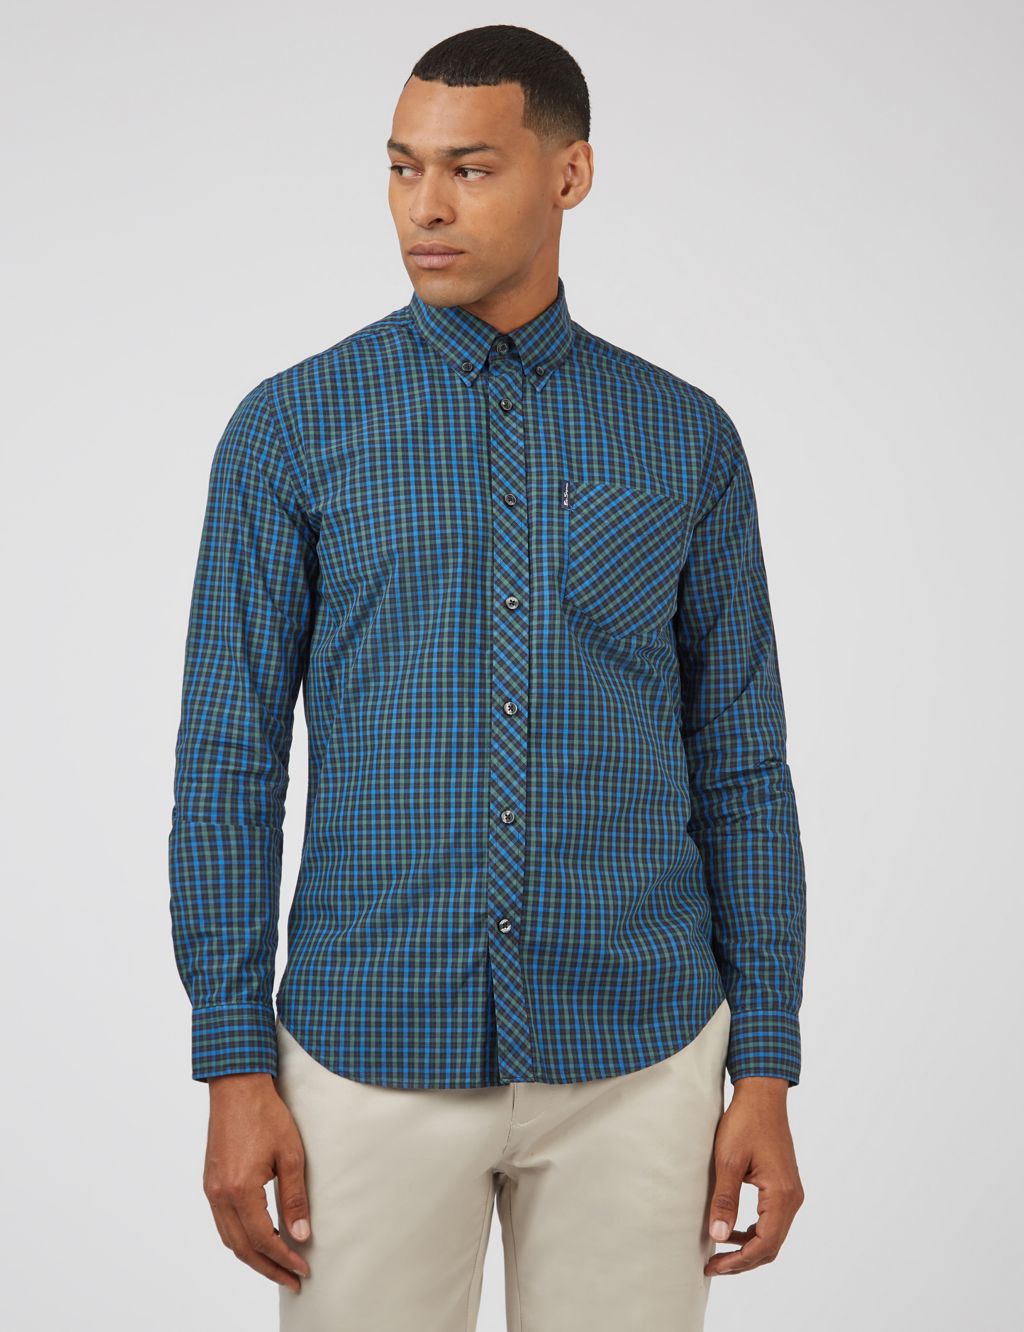 Regular Fit Pure Cotton Gingham Oxford Shirt image 1